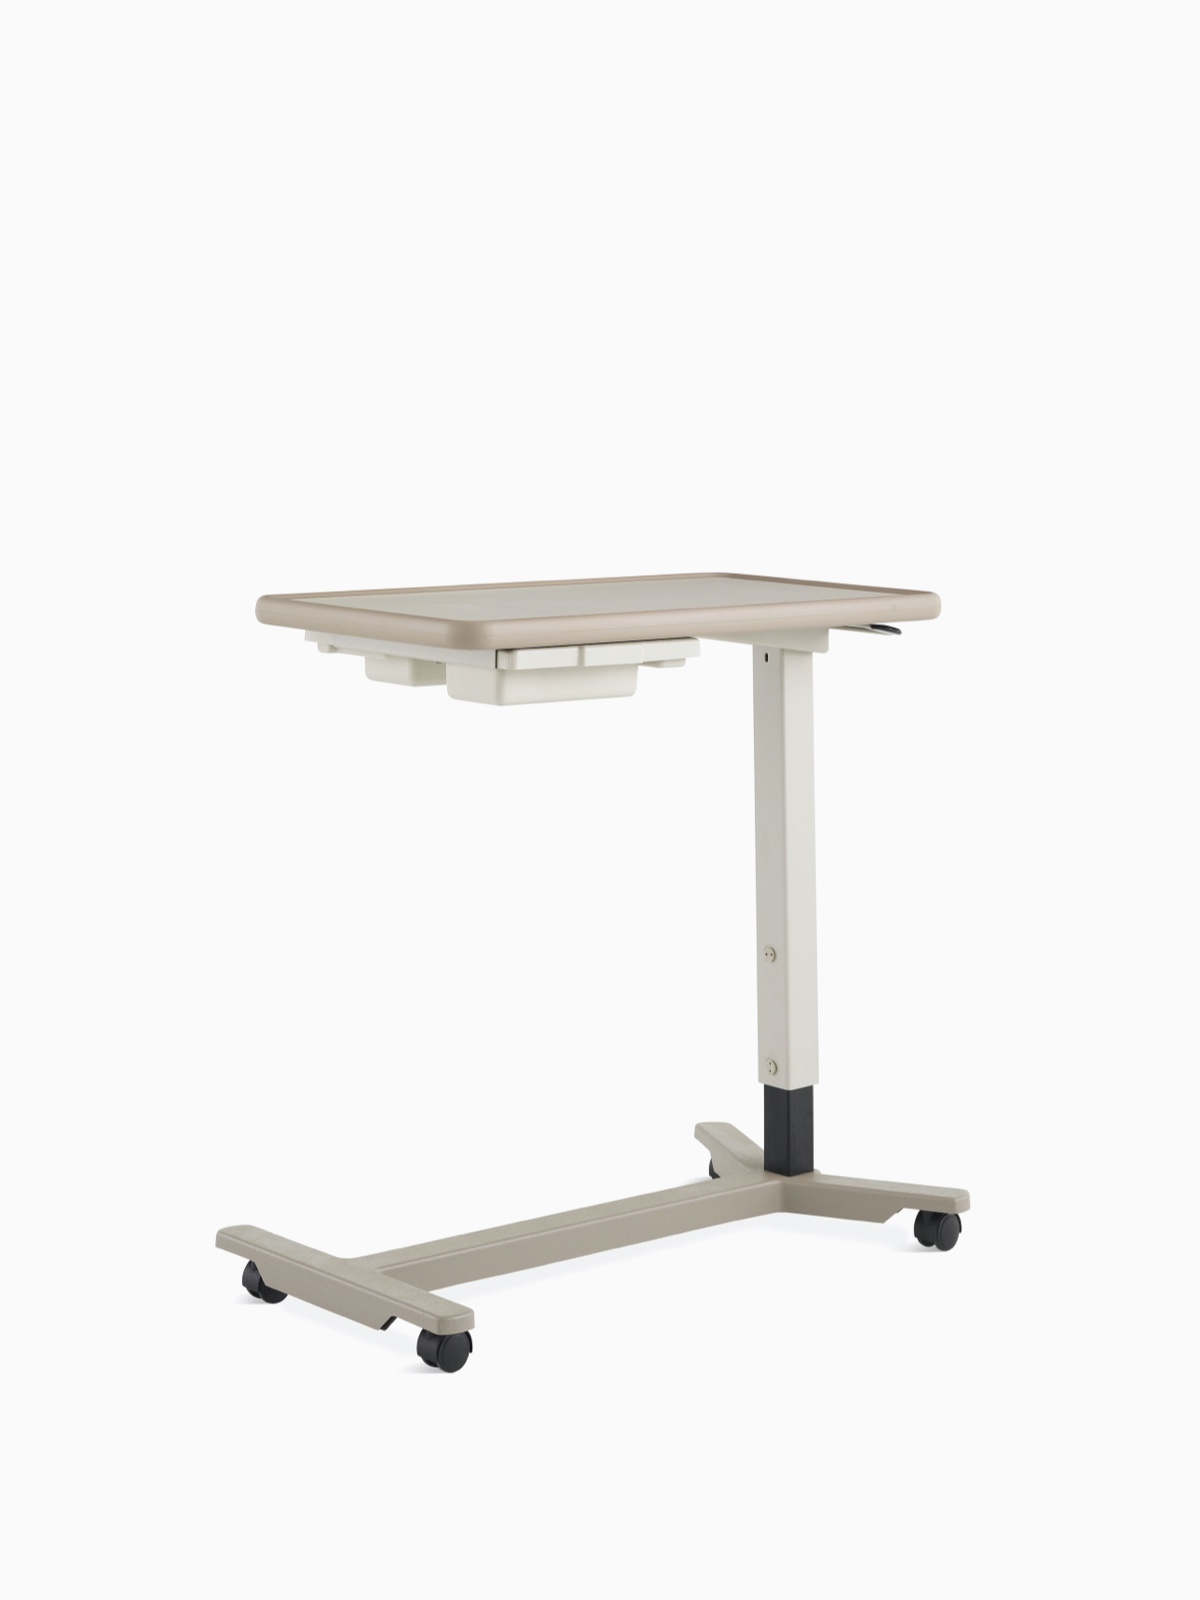 EZ-123 Overbed Table